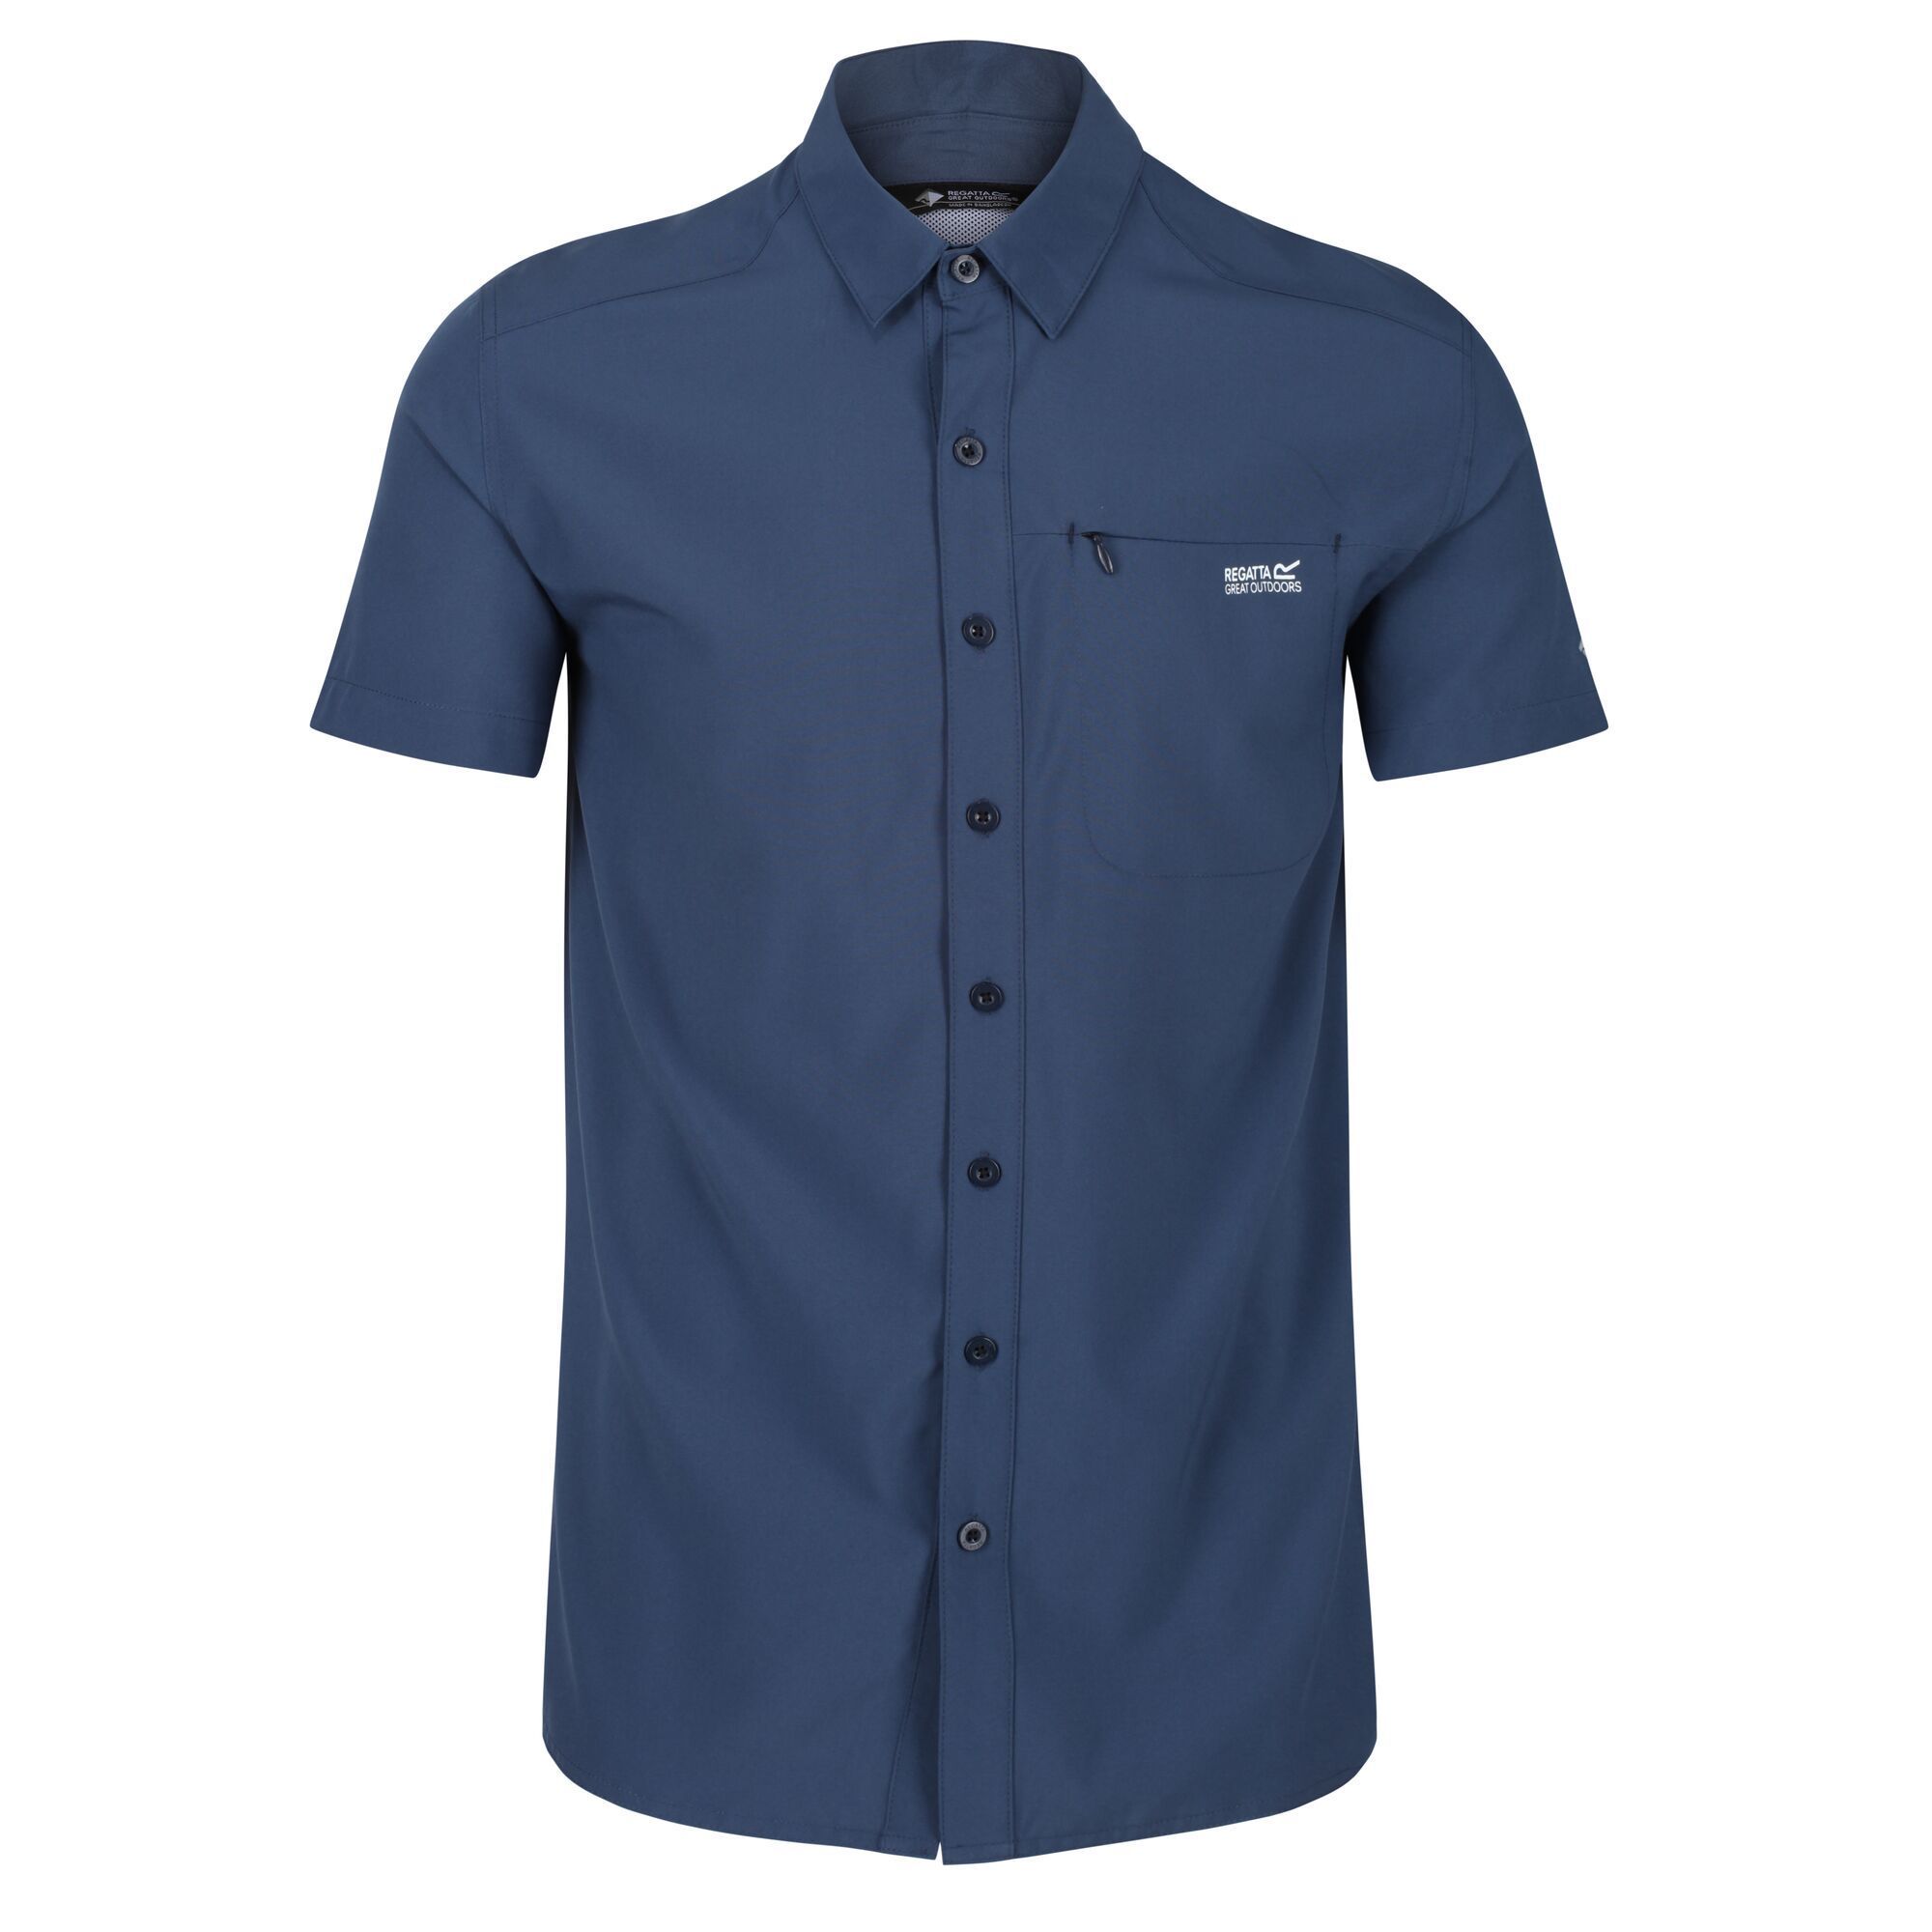 Material: 96% Polyester, 4% Elastane. Showerproof Isoflex short-sleeved shirt with airflow panels and durable water-repellent finish. Underarm mesh. Double layer collar. Trim, zipped chest pocket. Regatta logo on left arm.